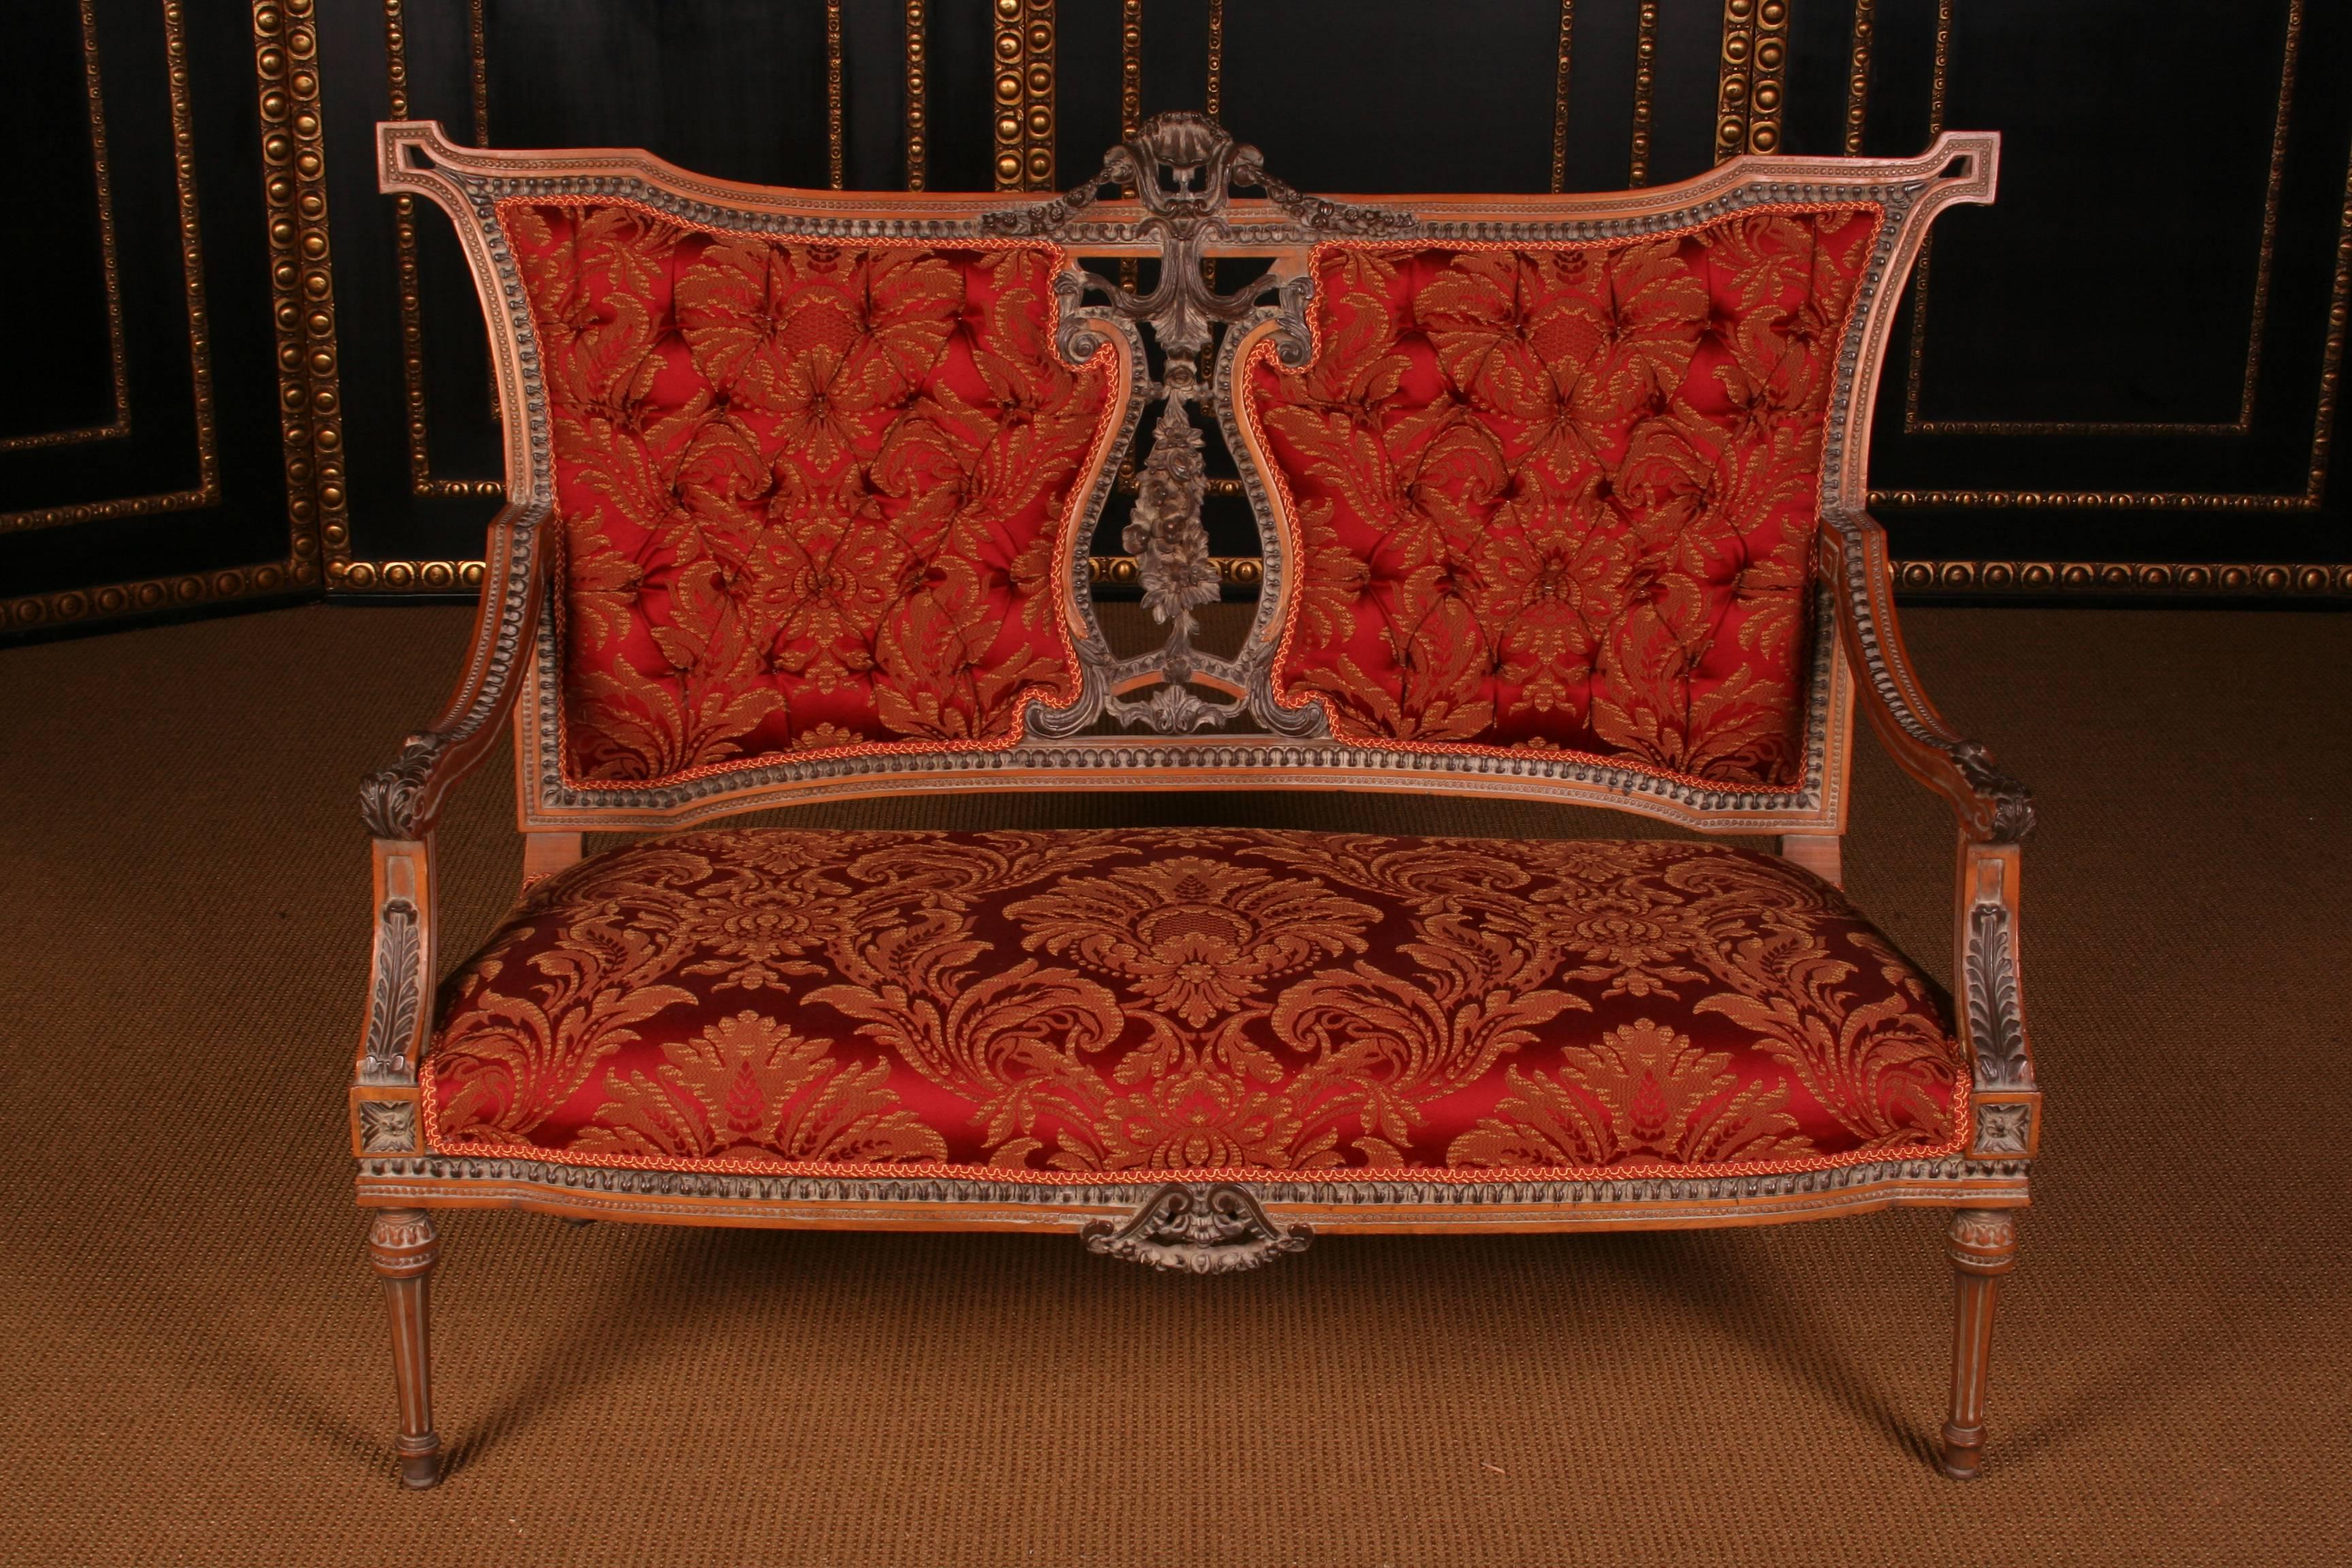 An elegant French garniture in Louis 16th style.
Solid beechwood, finely carved and edged.

Measurements:
Sofa: Height 101 cm, length 133 cm, depth 62 cm
Armchair: Width 64 cm, height 101 cm, depth 62 cm

(B-Dom-65).